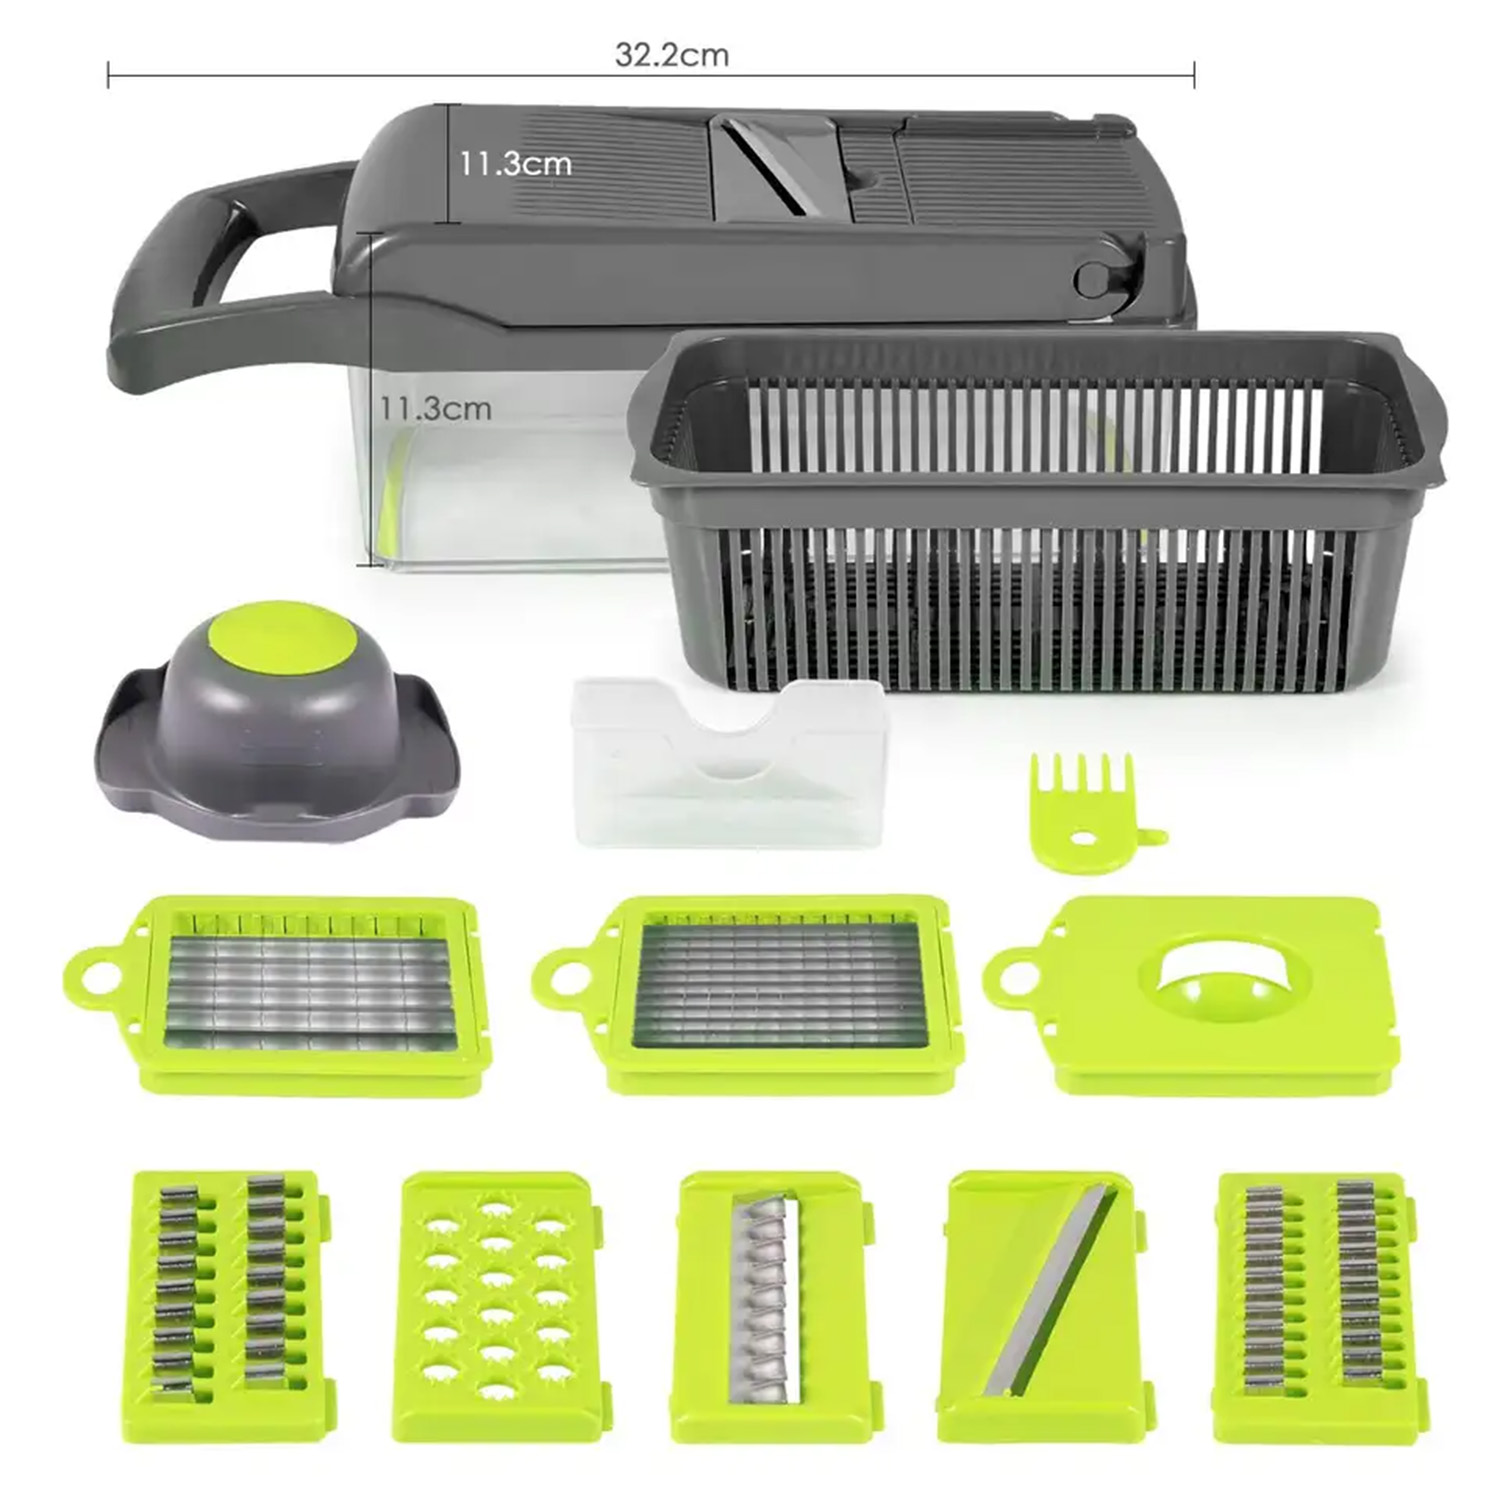  13 in 1 Multifunctional Food Chopper with 8 Blades Slicer Vegetable Cutter With Container Adjustable Vegetable Cutter Vegetable, Onion Chopper